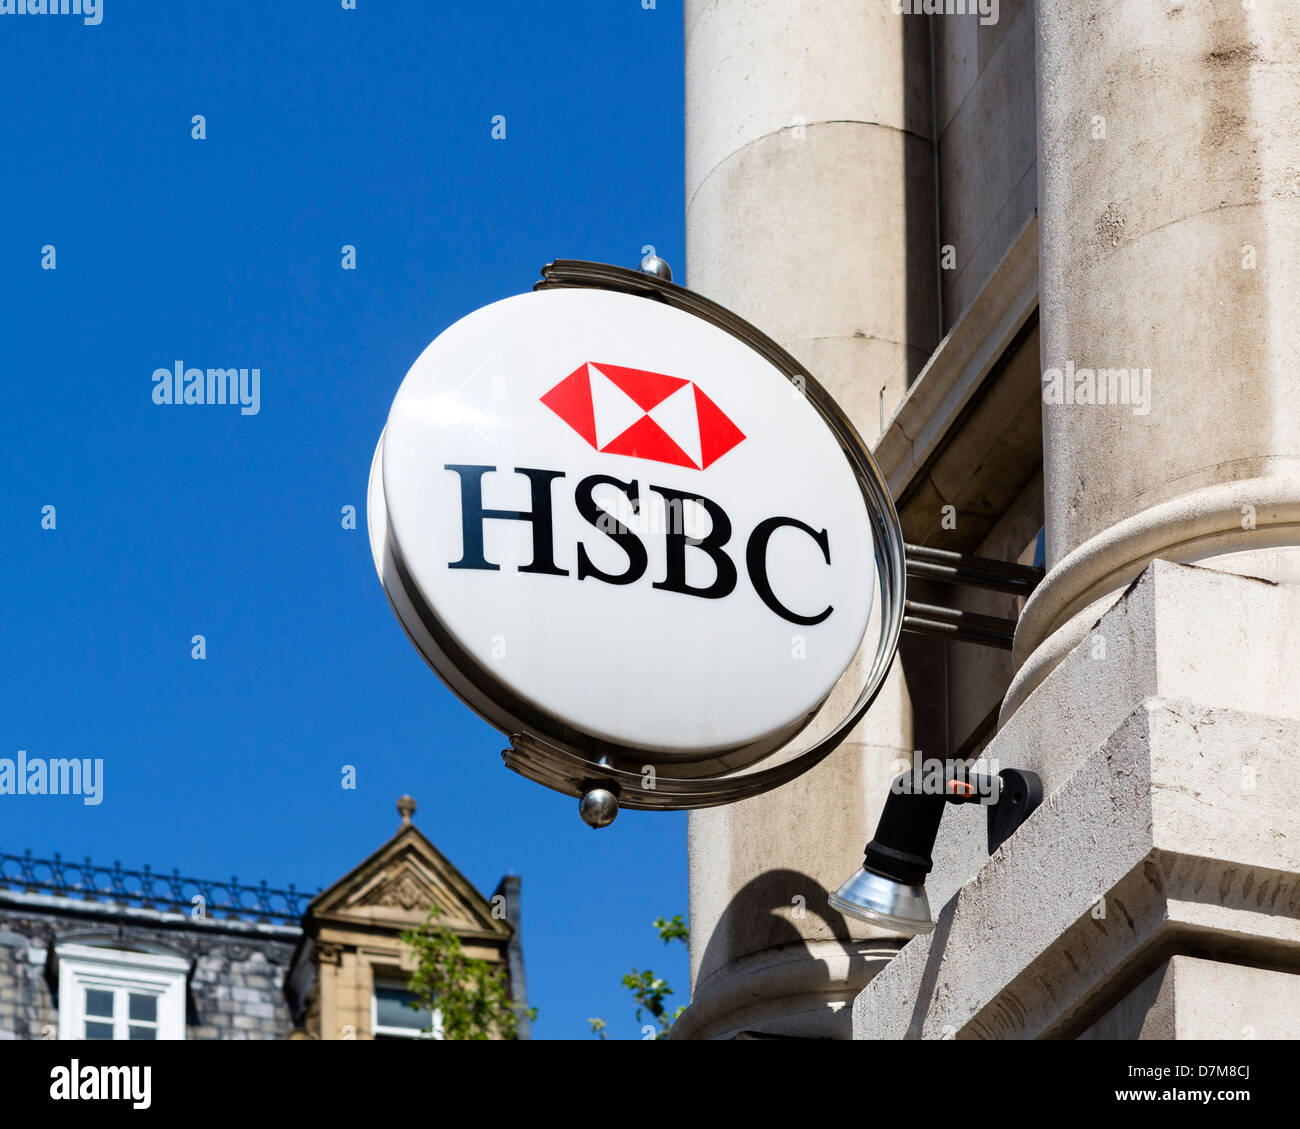 HSBC Bank in Doncaster, South Yorkshire, England, UK Stockfoto